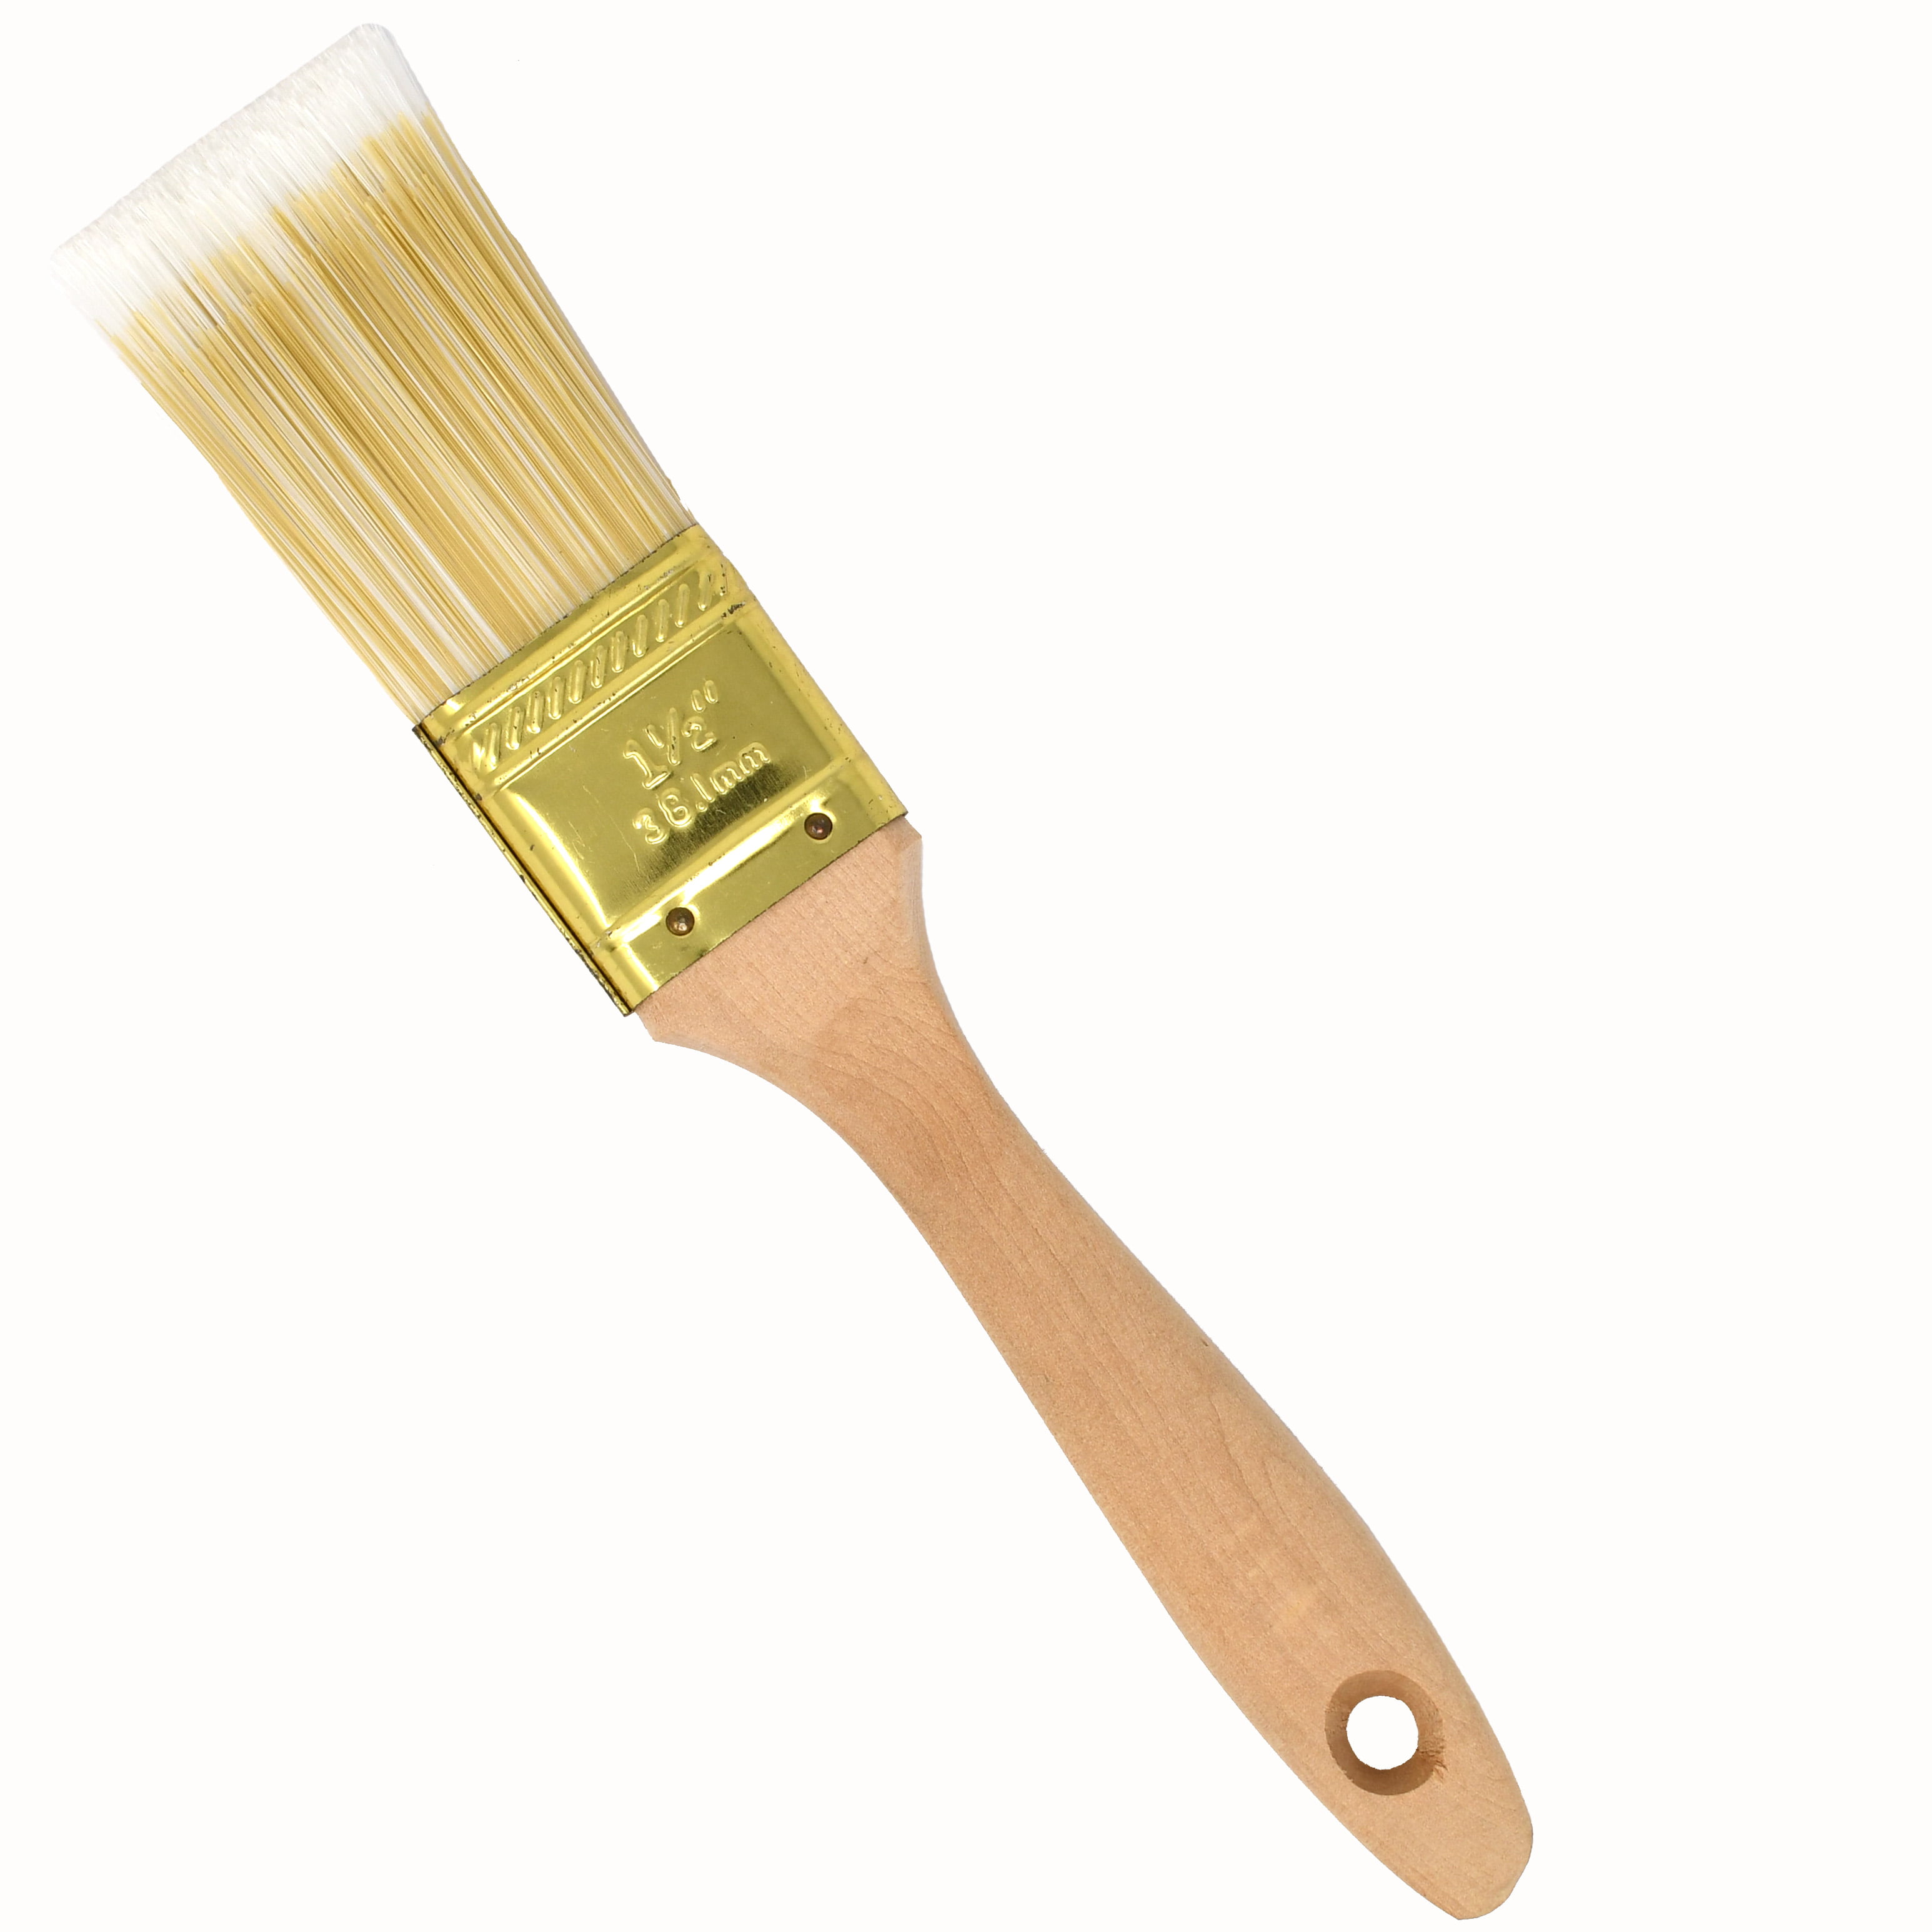 Pb1-1.2p-unb 1.5 In. Flat-cut Polyester Paint Brush With Wooden Handle For Home Exterior Or Interior